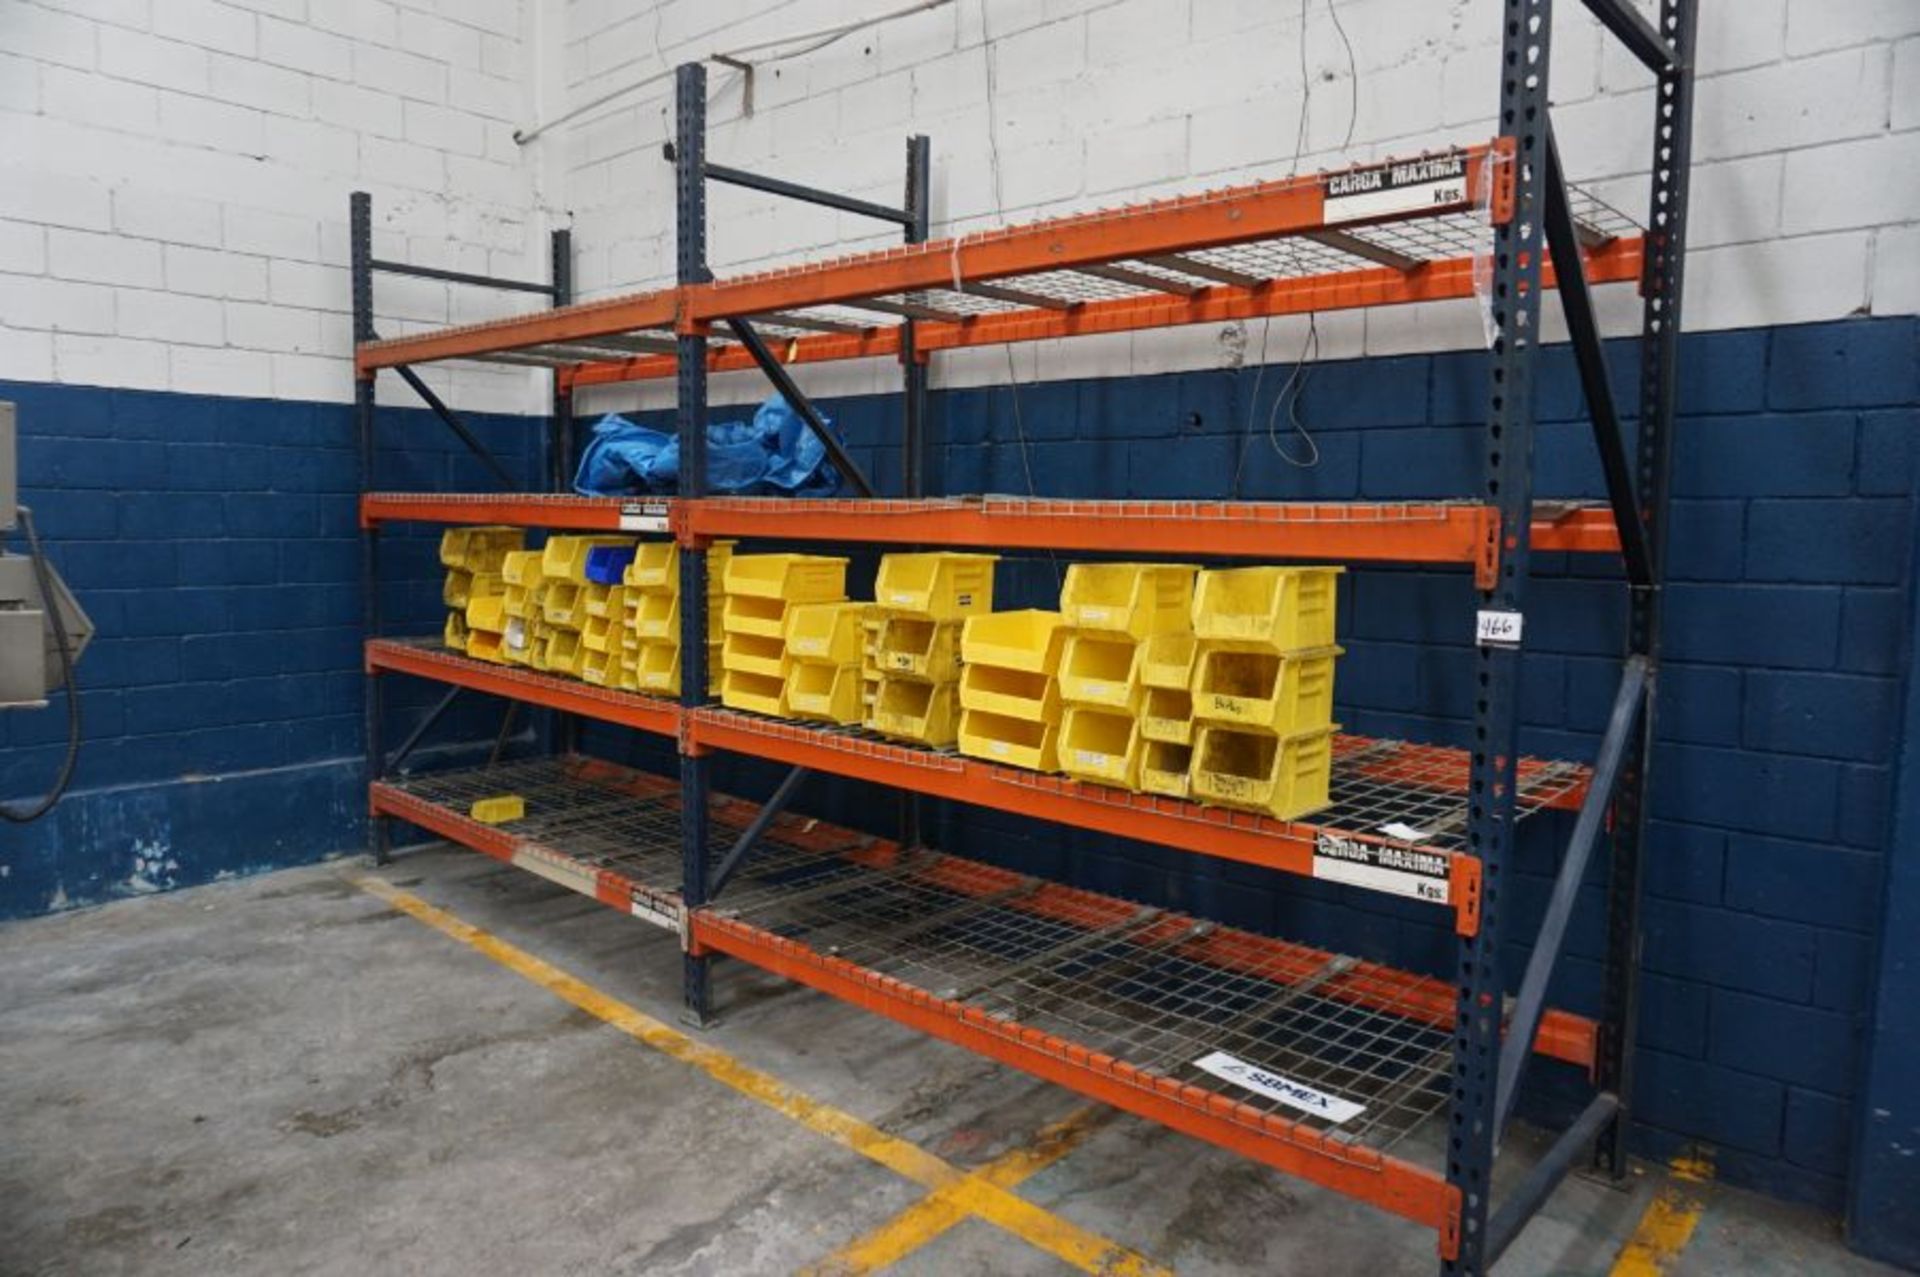 (2) Sections of Pallet Racking with Yellow Bins